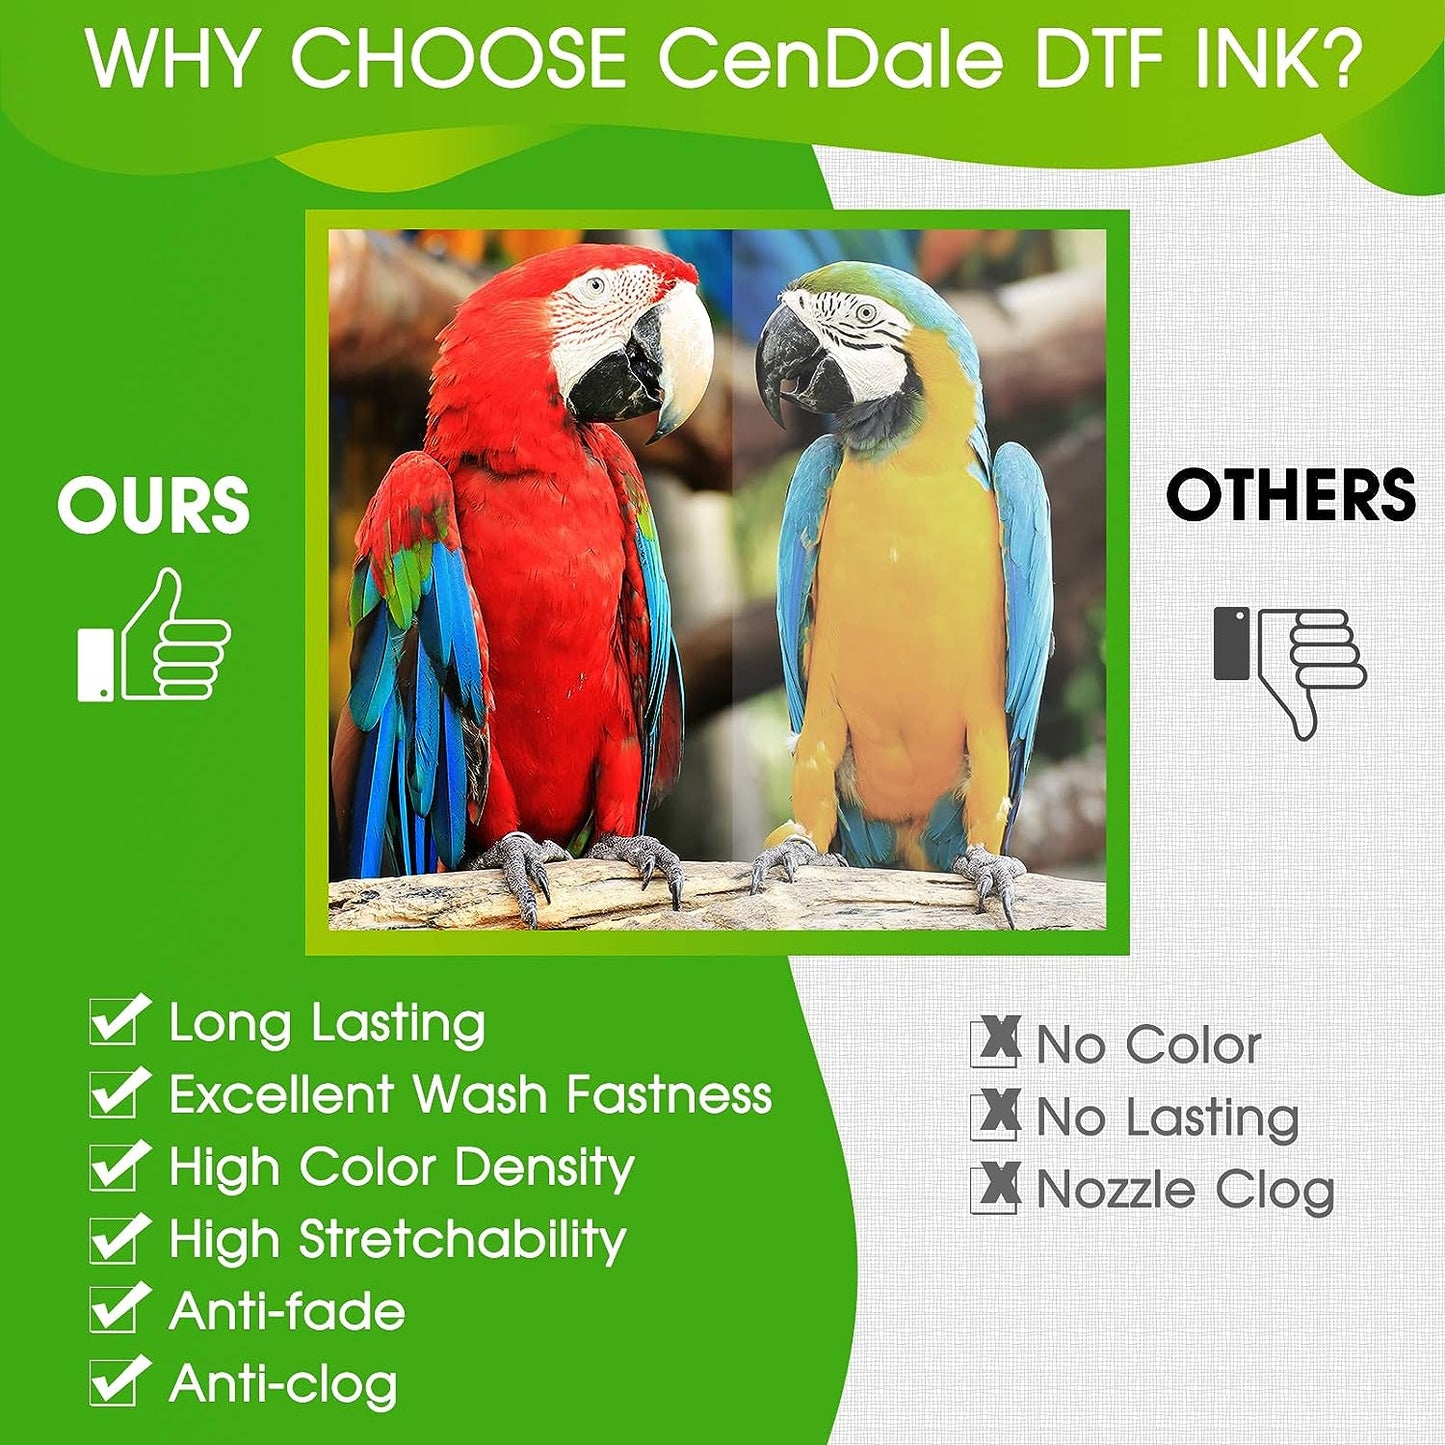 CenDale Premium DTF Ink DTF Transfer Ink Refill for DTF Printers Epson ET-8550, XP-15000, L1800, L805, R1390, R2400, Heat Transfer Printing Direct to Film (500ml x 6, CMYK Wh)